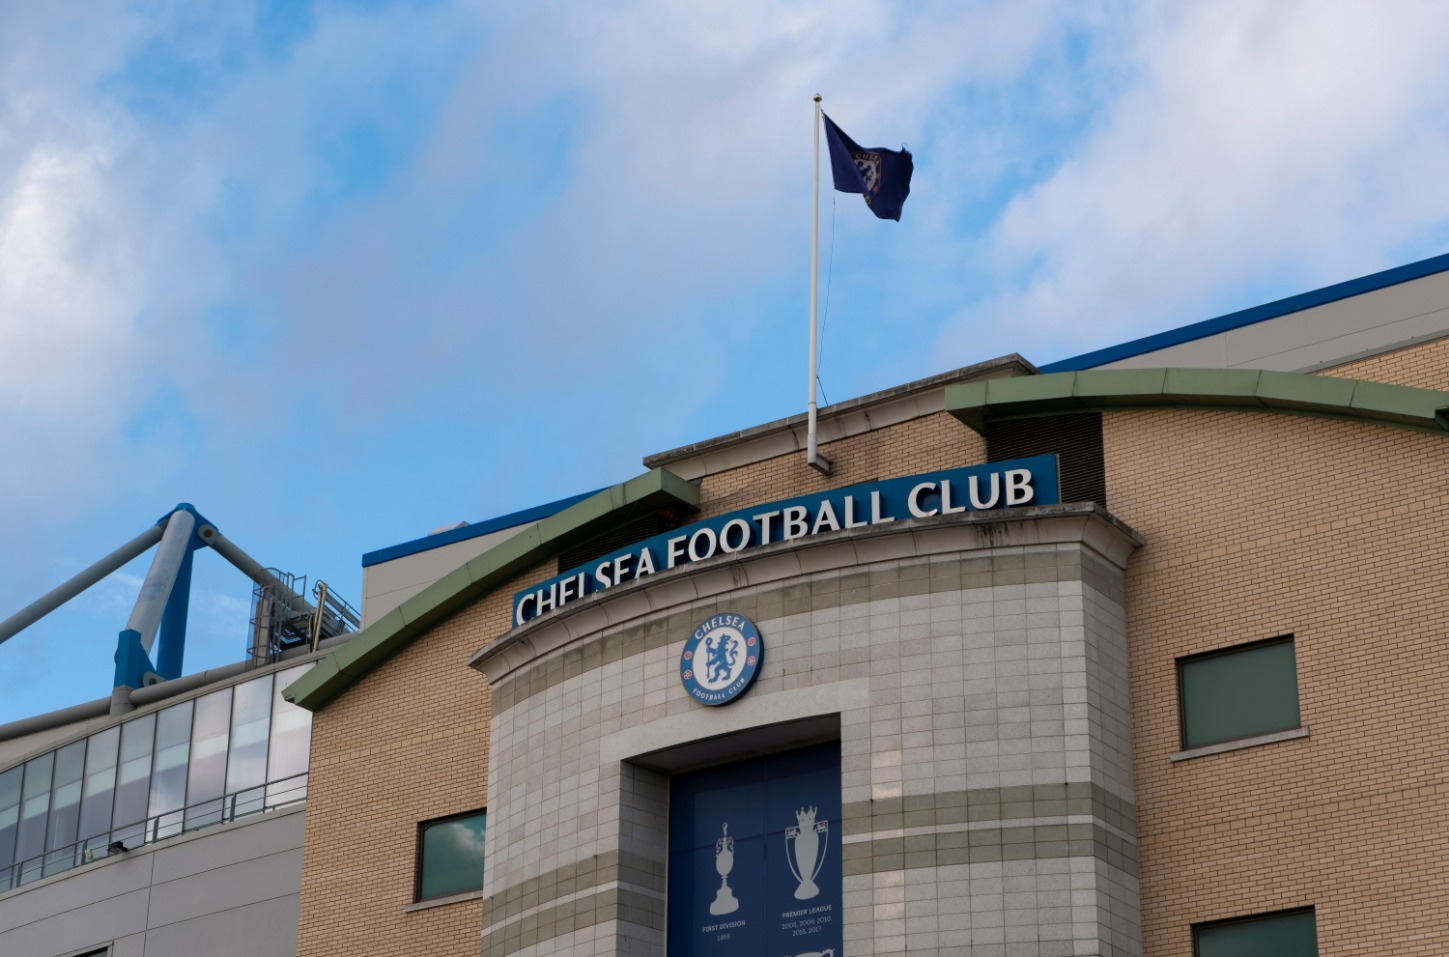 Chelsea billion-pound question: is the new business strategy paying off?